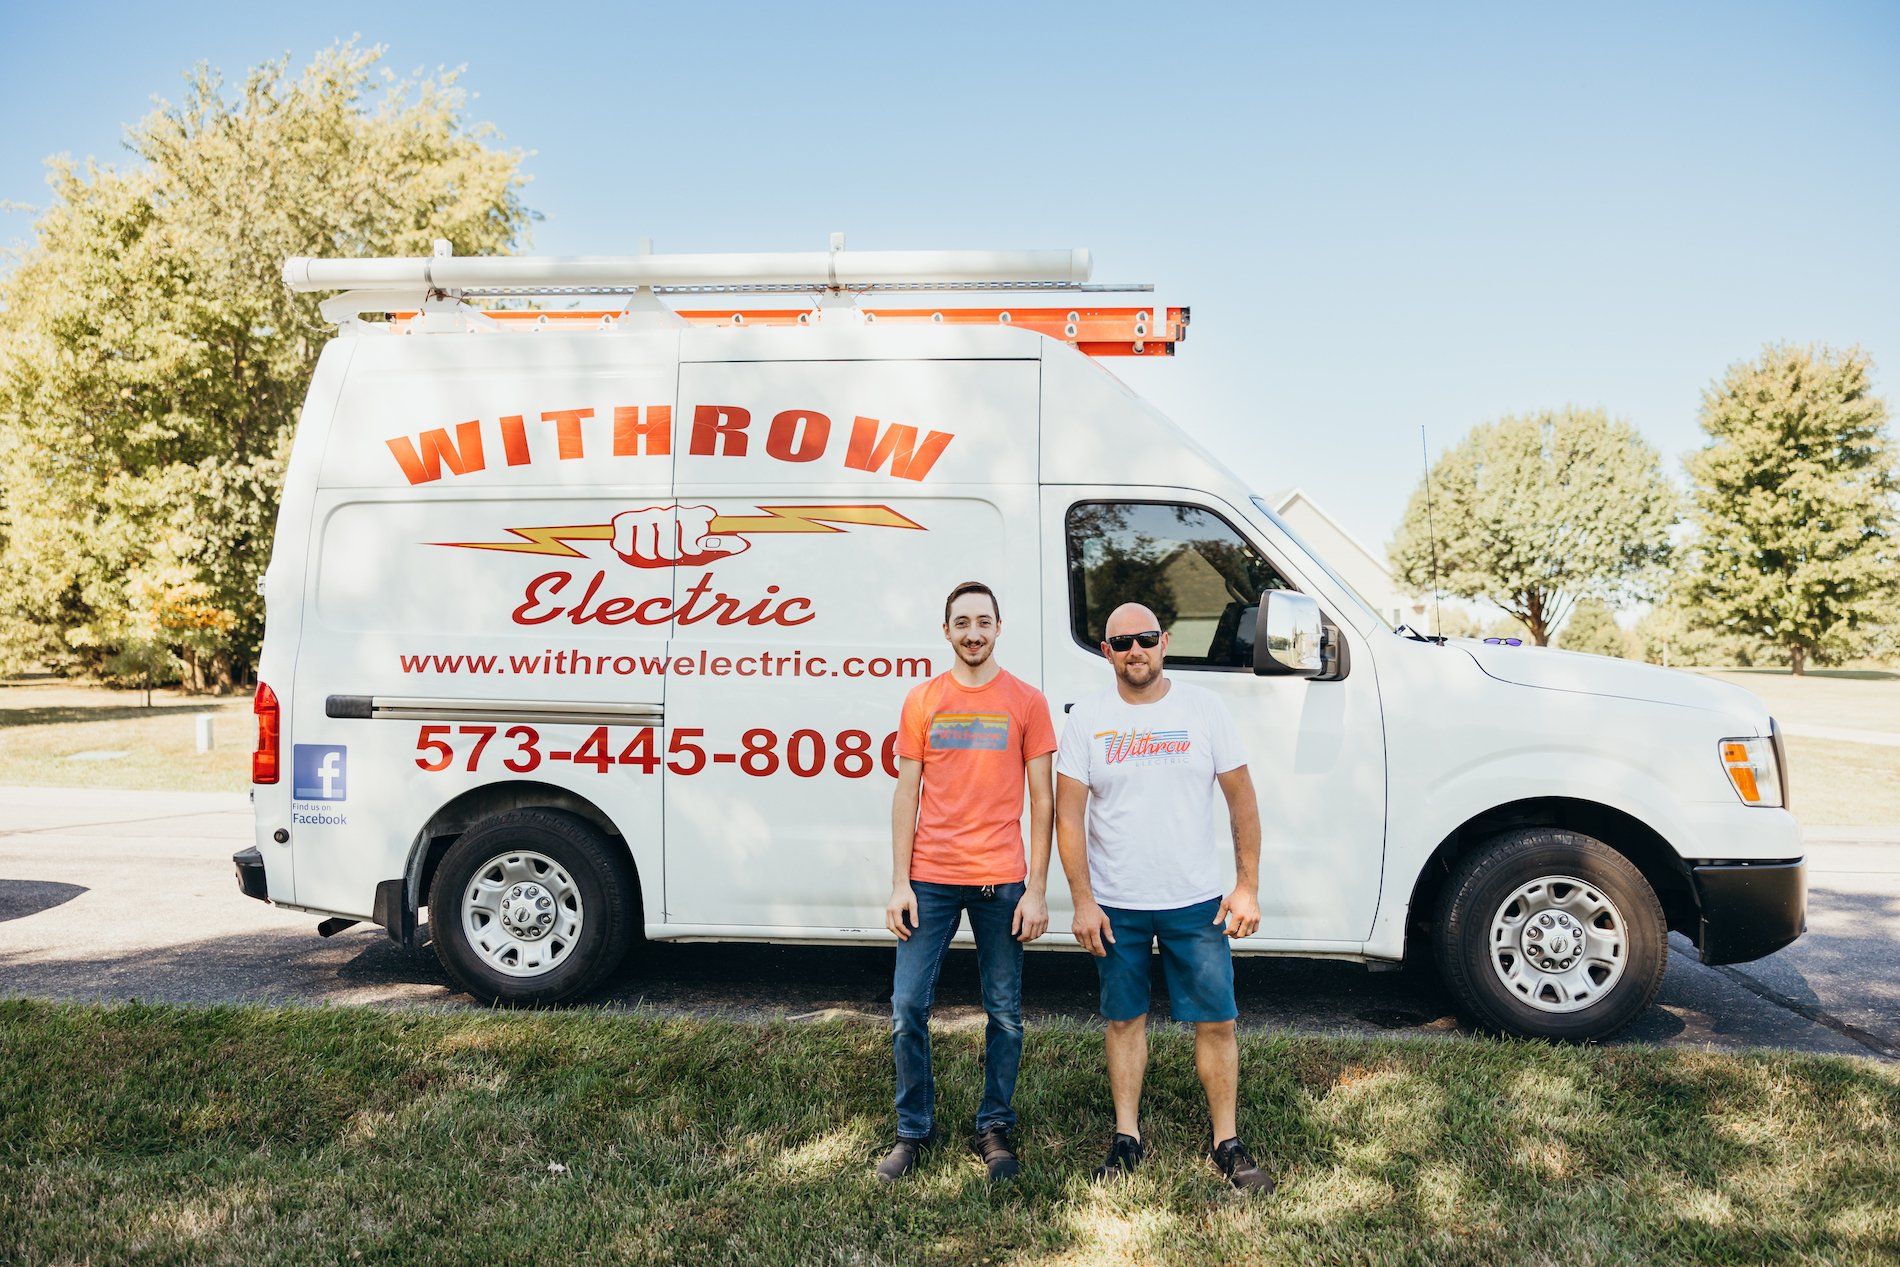 Call Withrow Electric to Install Wiring, Lighting, Panels & More in Your New Build in Columbia, MO.